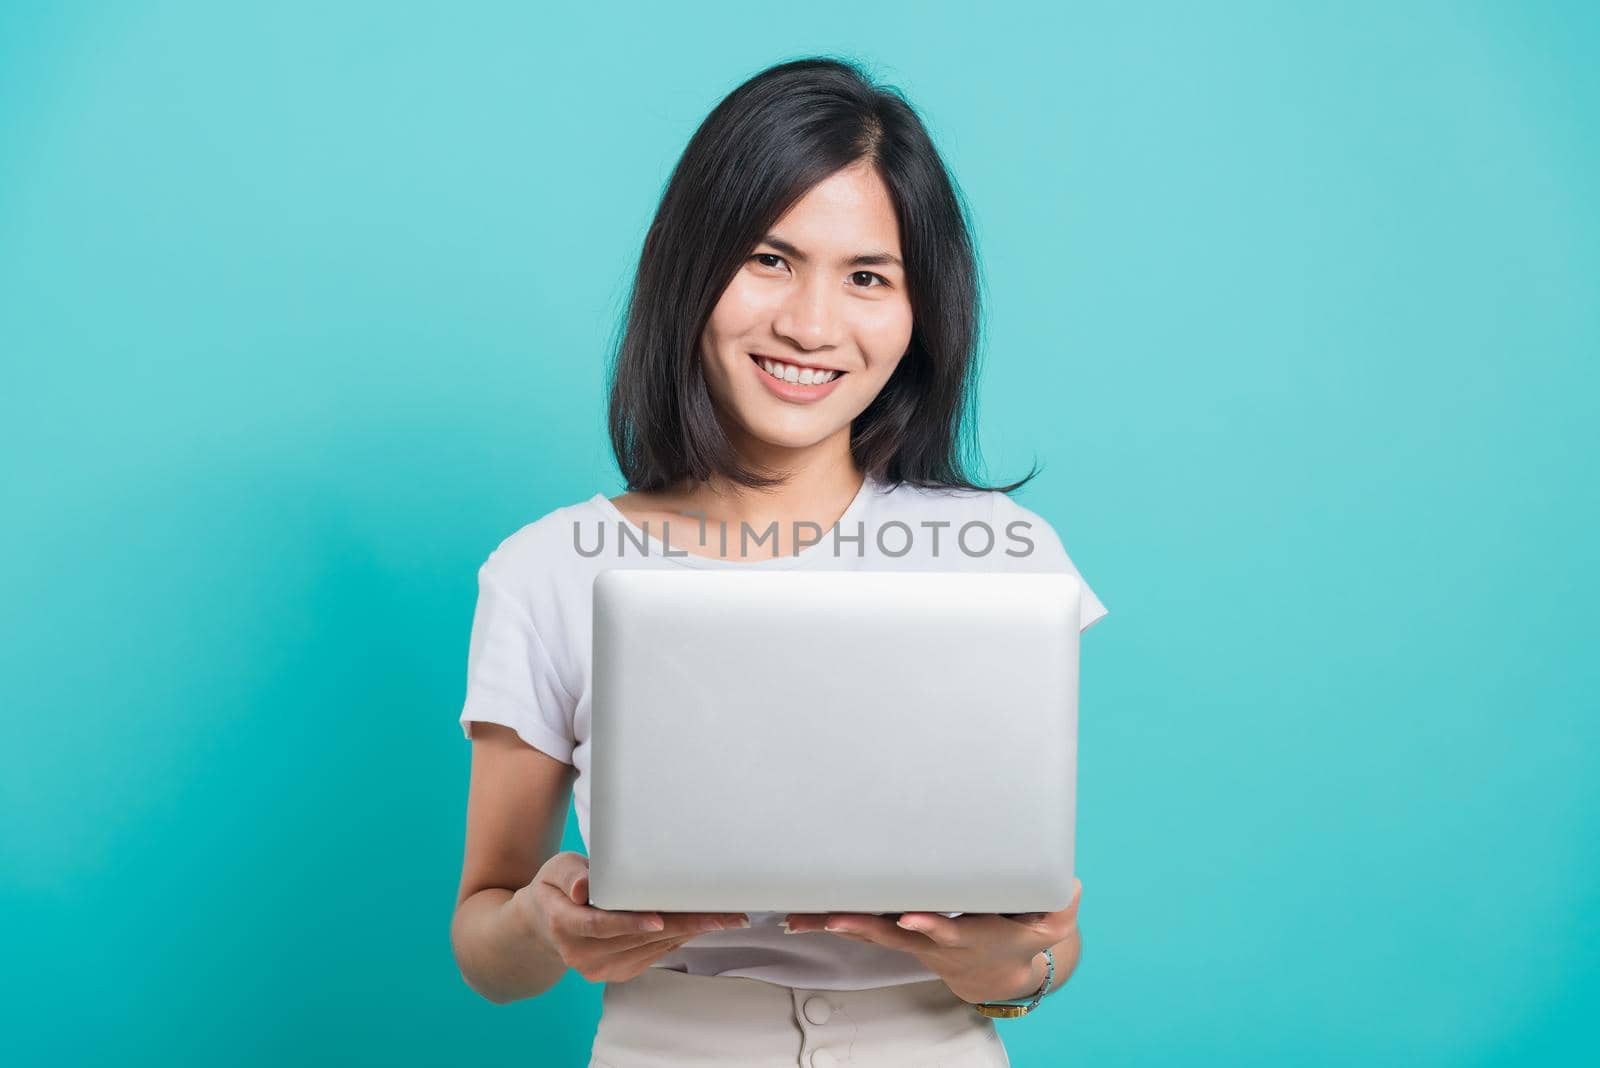 Portrait happy Asian beautiful young woman smile white teeth standing wear white t-shirt, She holding and using a laptop computer, studio shot on blue background with copy space for text